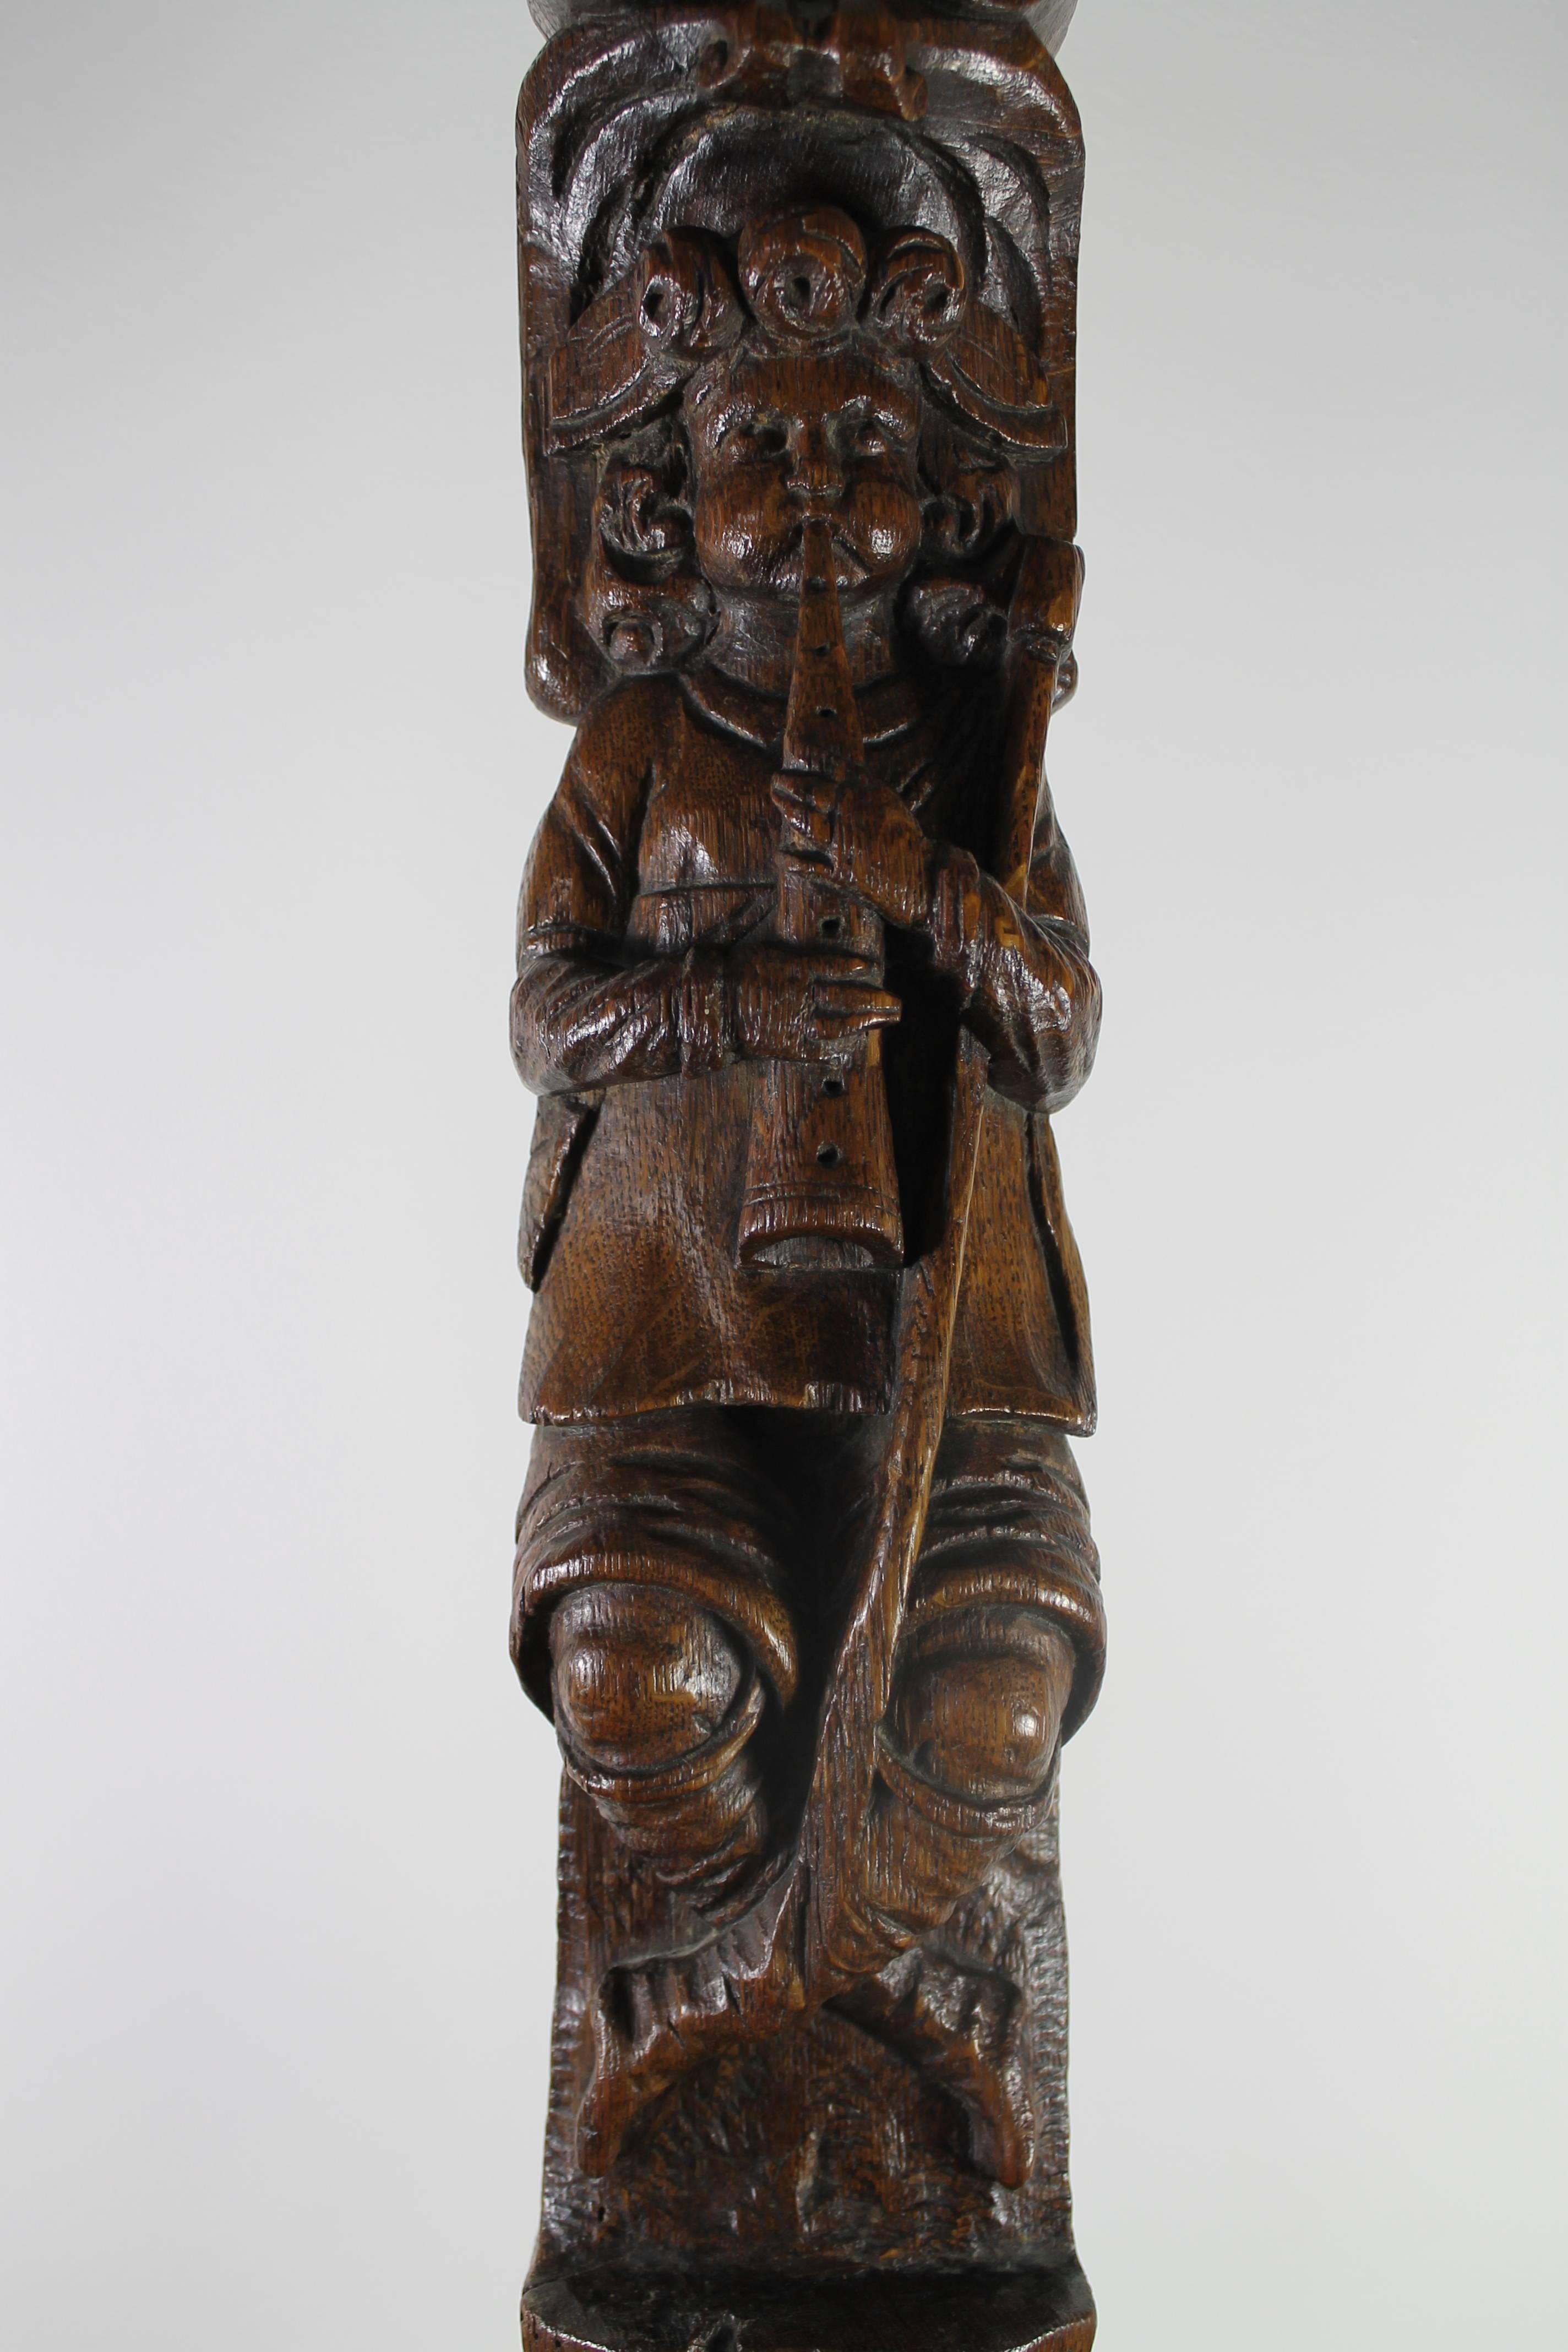 Flute Player in Oak,  Dutch, (Probably an Ornament), 17th century,
Standing on an Iron Base